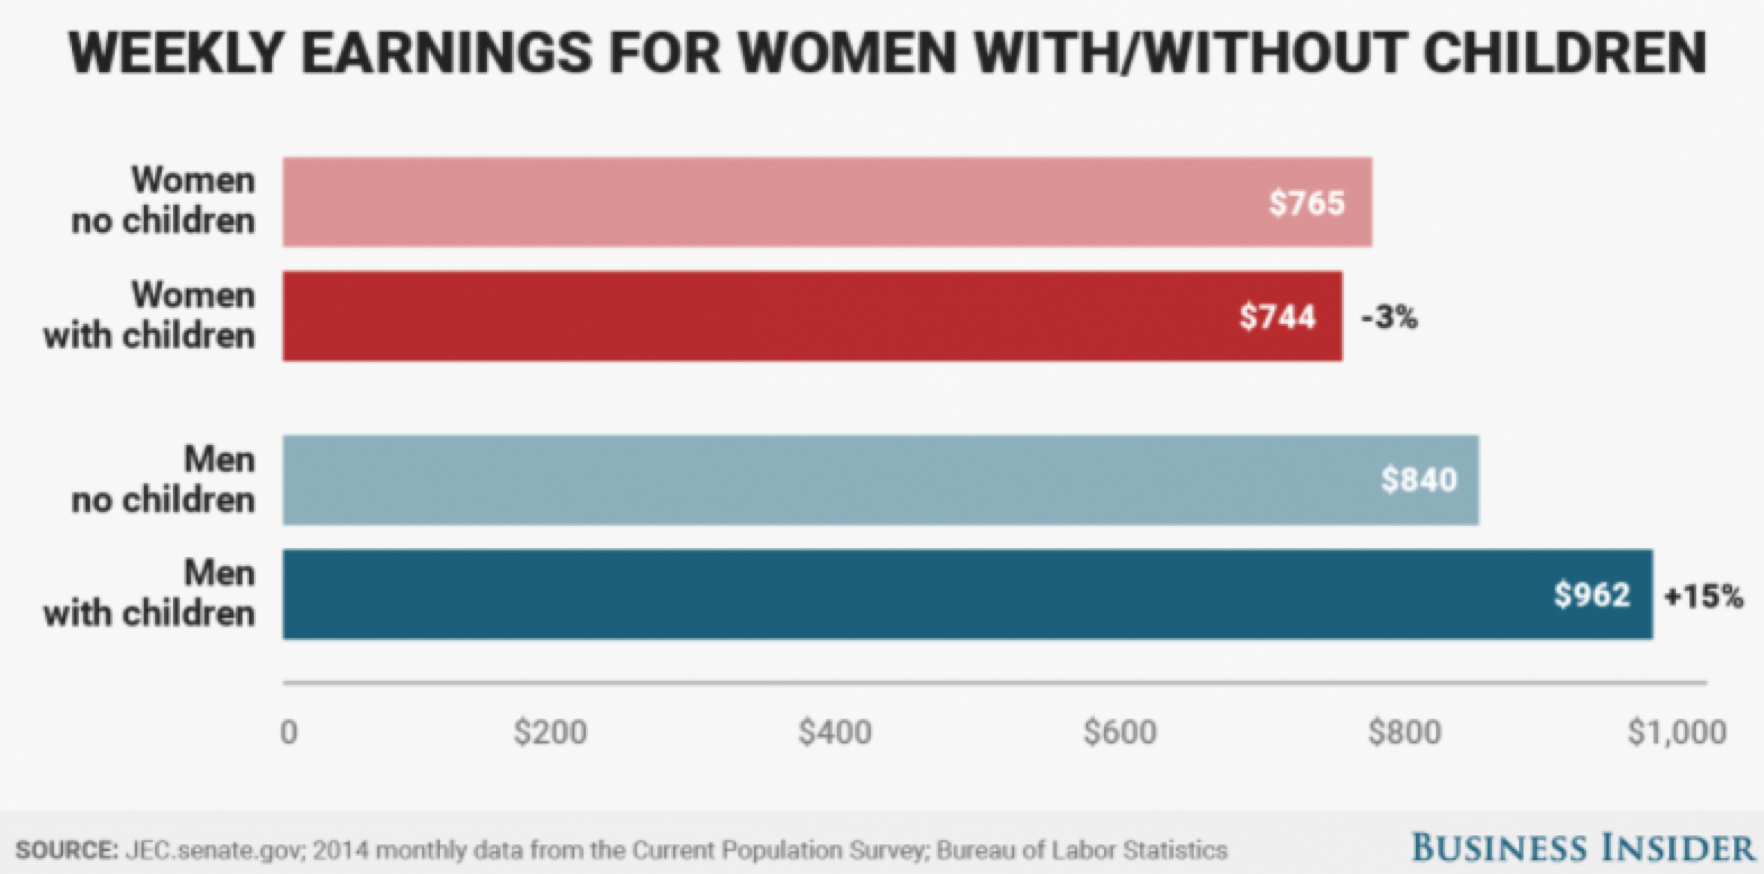 Weekly Earnings for Women vs. Men With/Without Children 